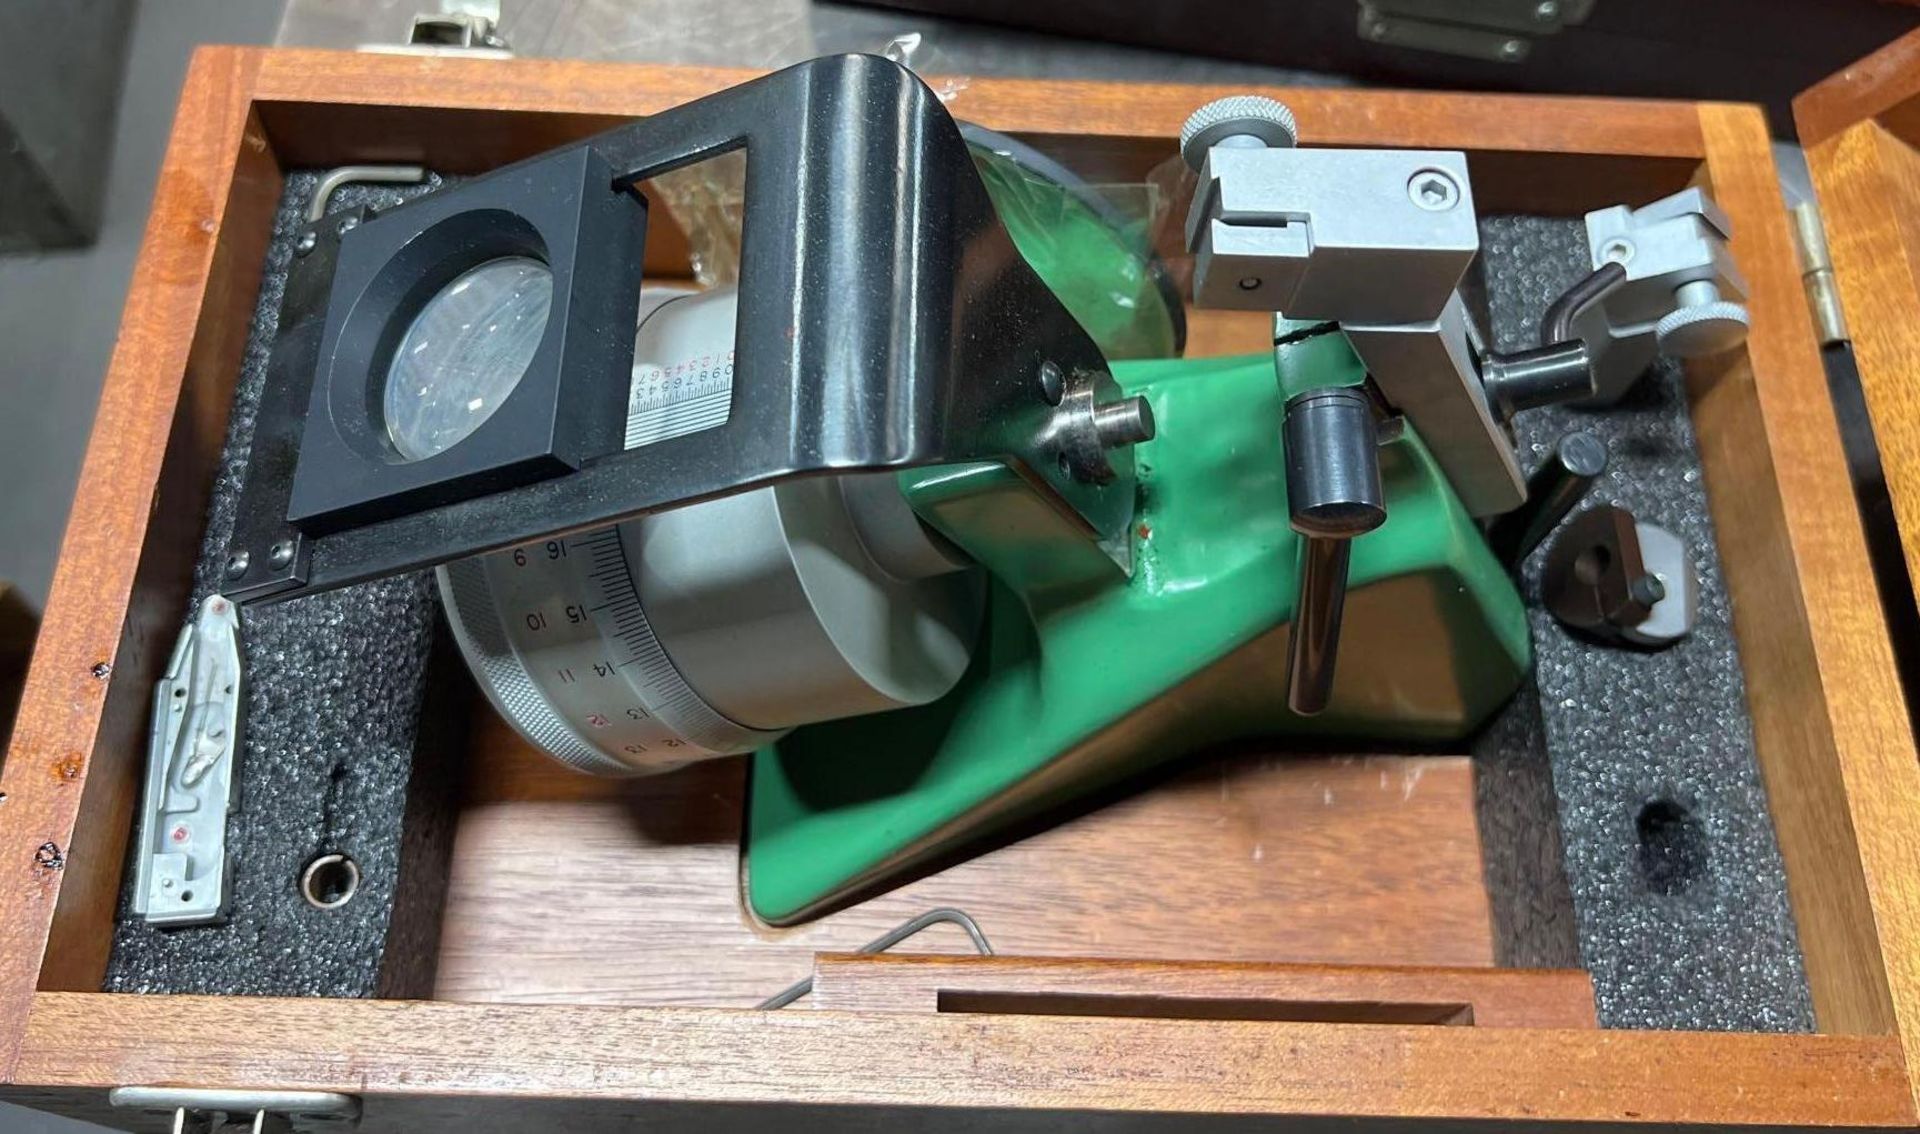 Federal 400B-1 Dial Indicator Calibrator Comparator w/ AT-76 Magnifier w/ Box - Image 3 of 6